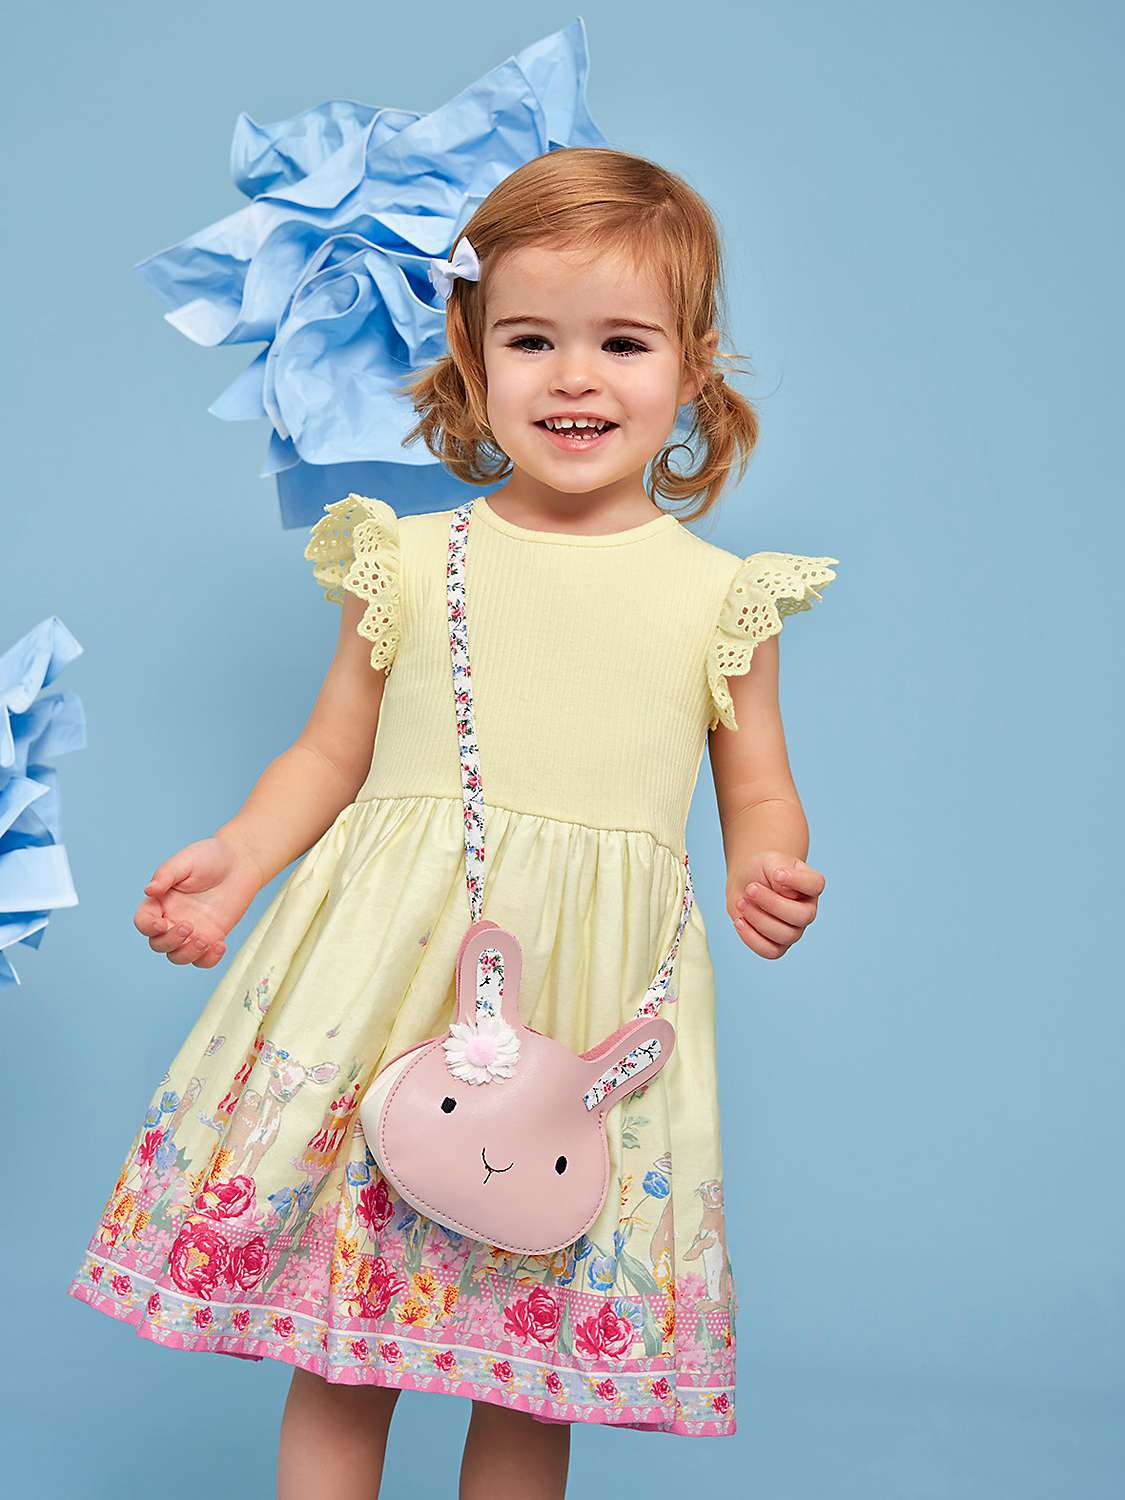 Buy Monsoon Baby 2-In-1 Tea Party Dress, Yellow Online at johnlewis.com